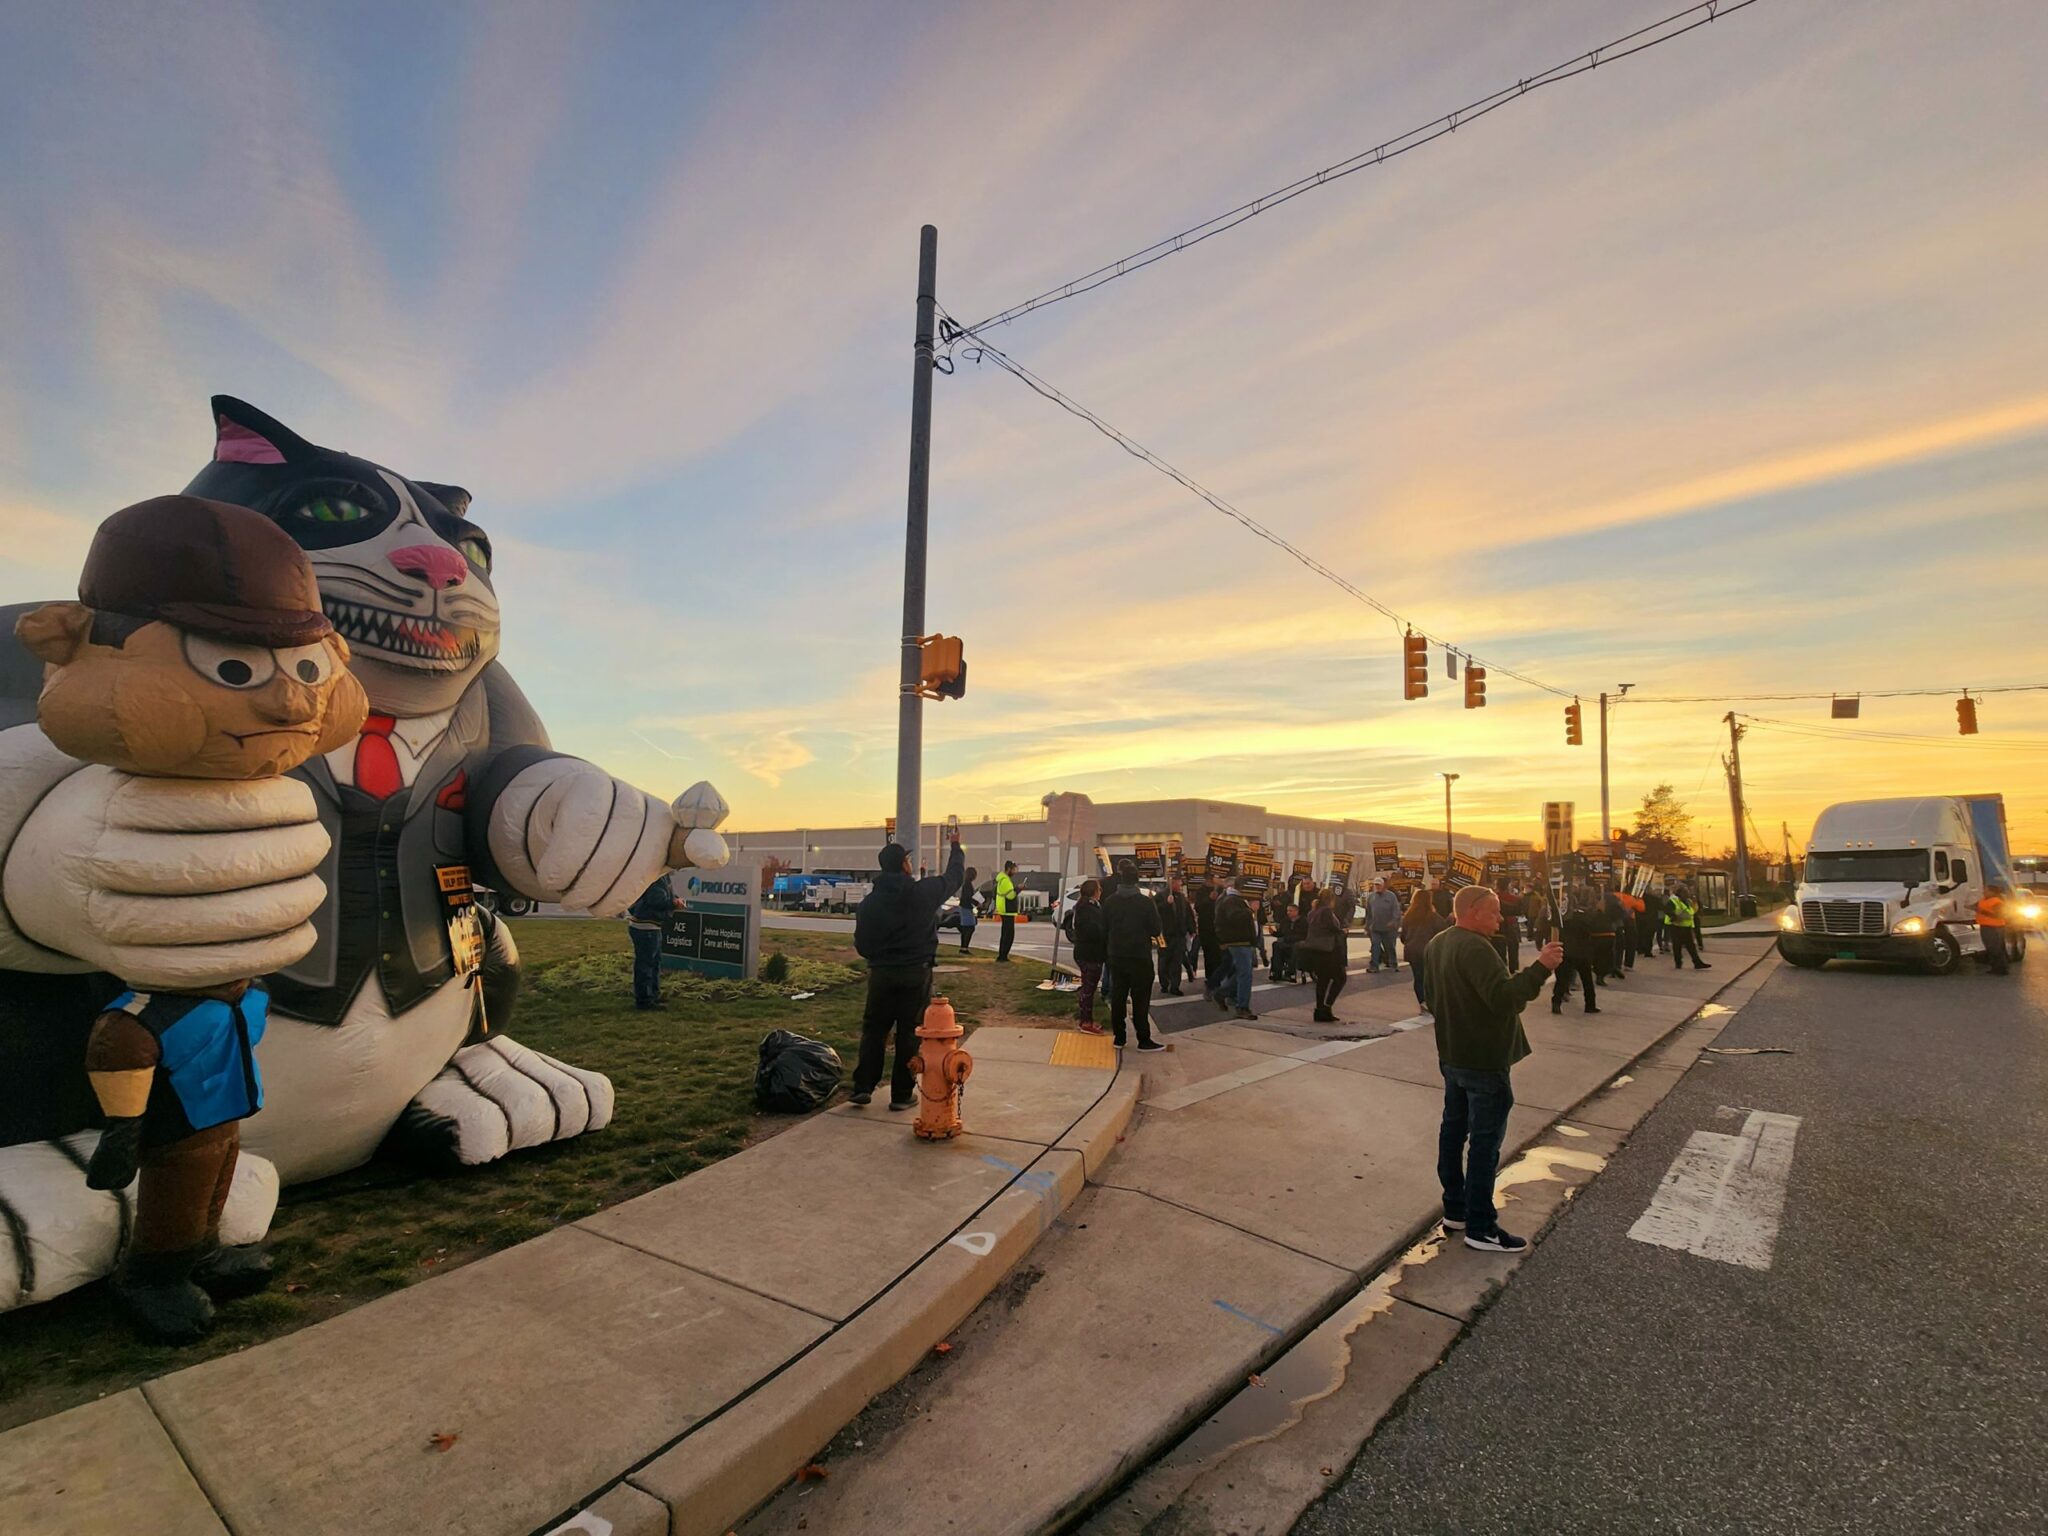 Teamsters Union Leads Picket Line Outside Amazon Warehouse in Baltimore